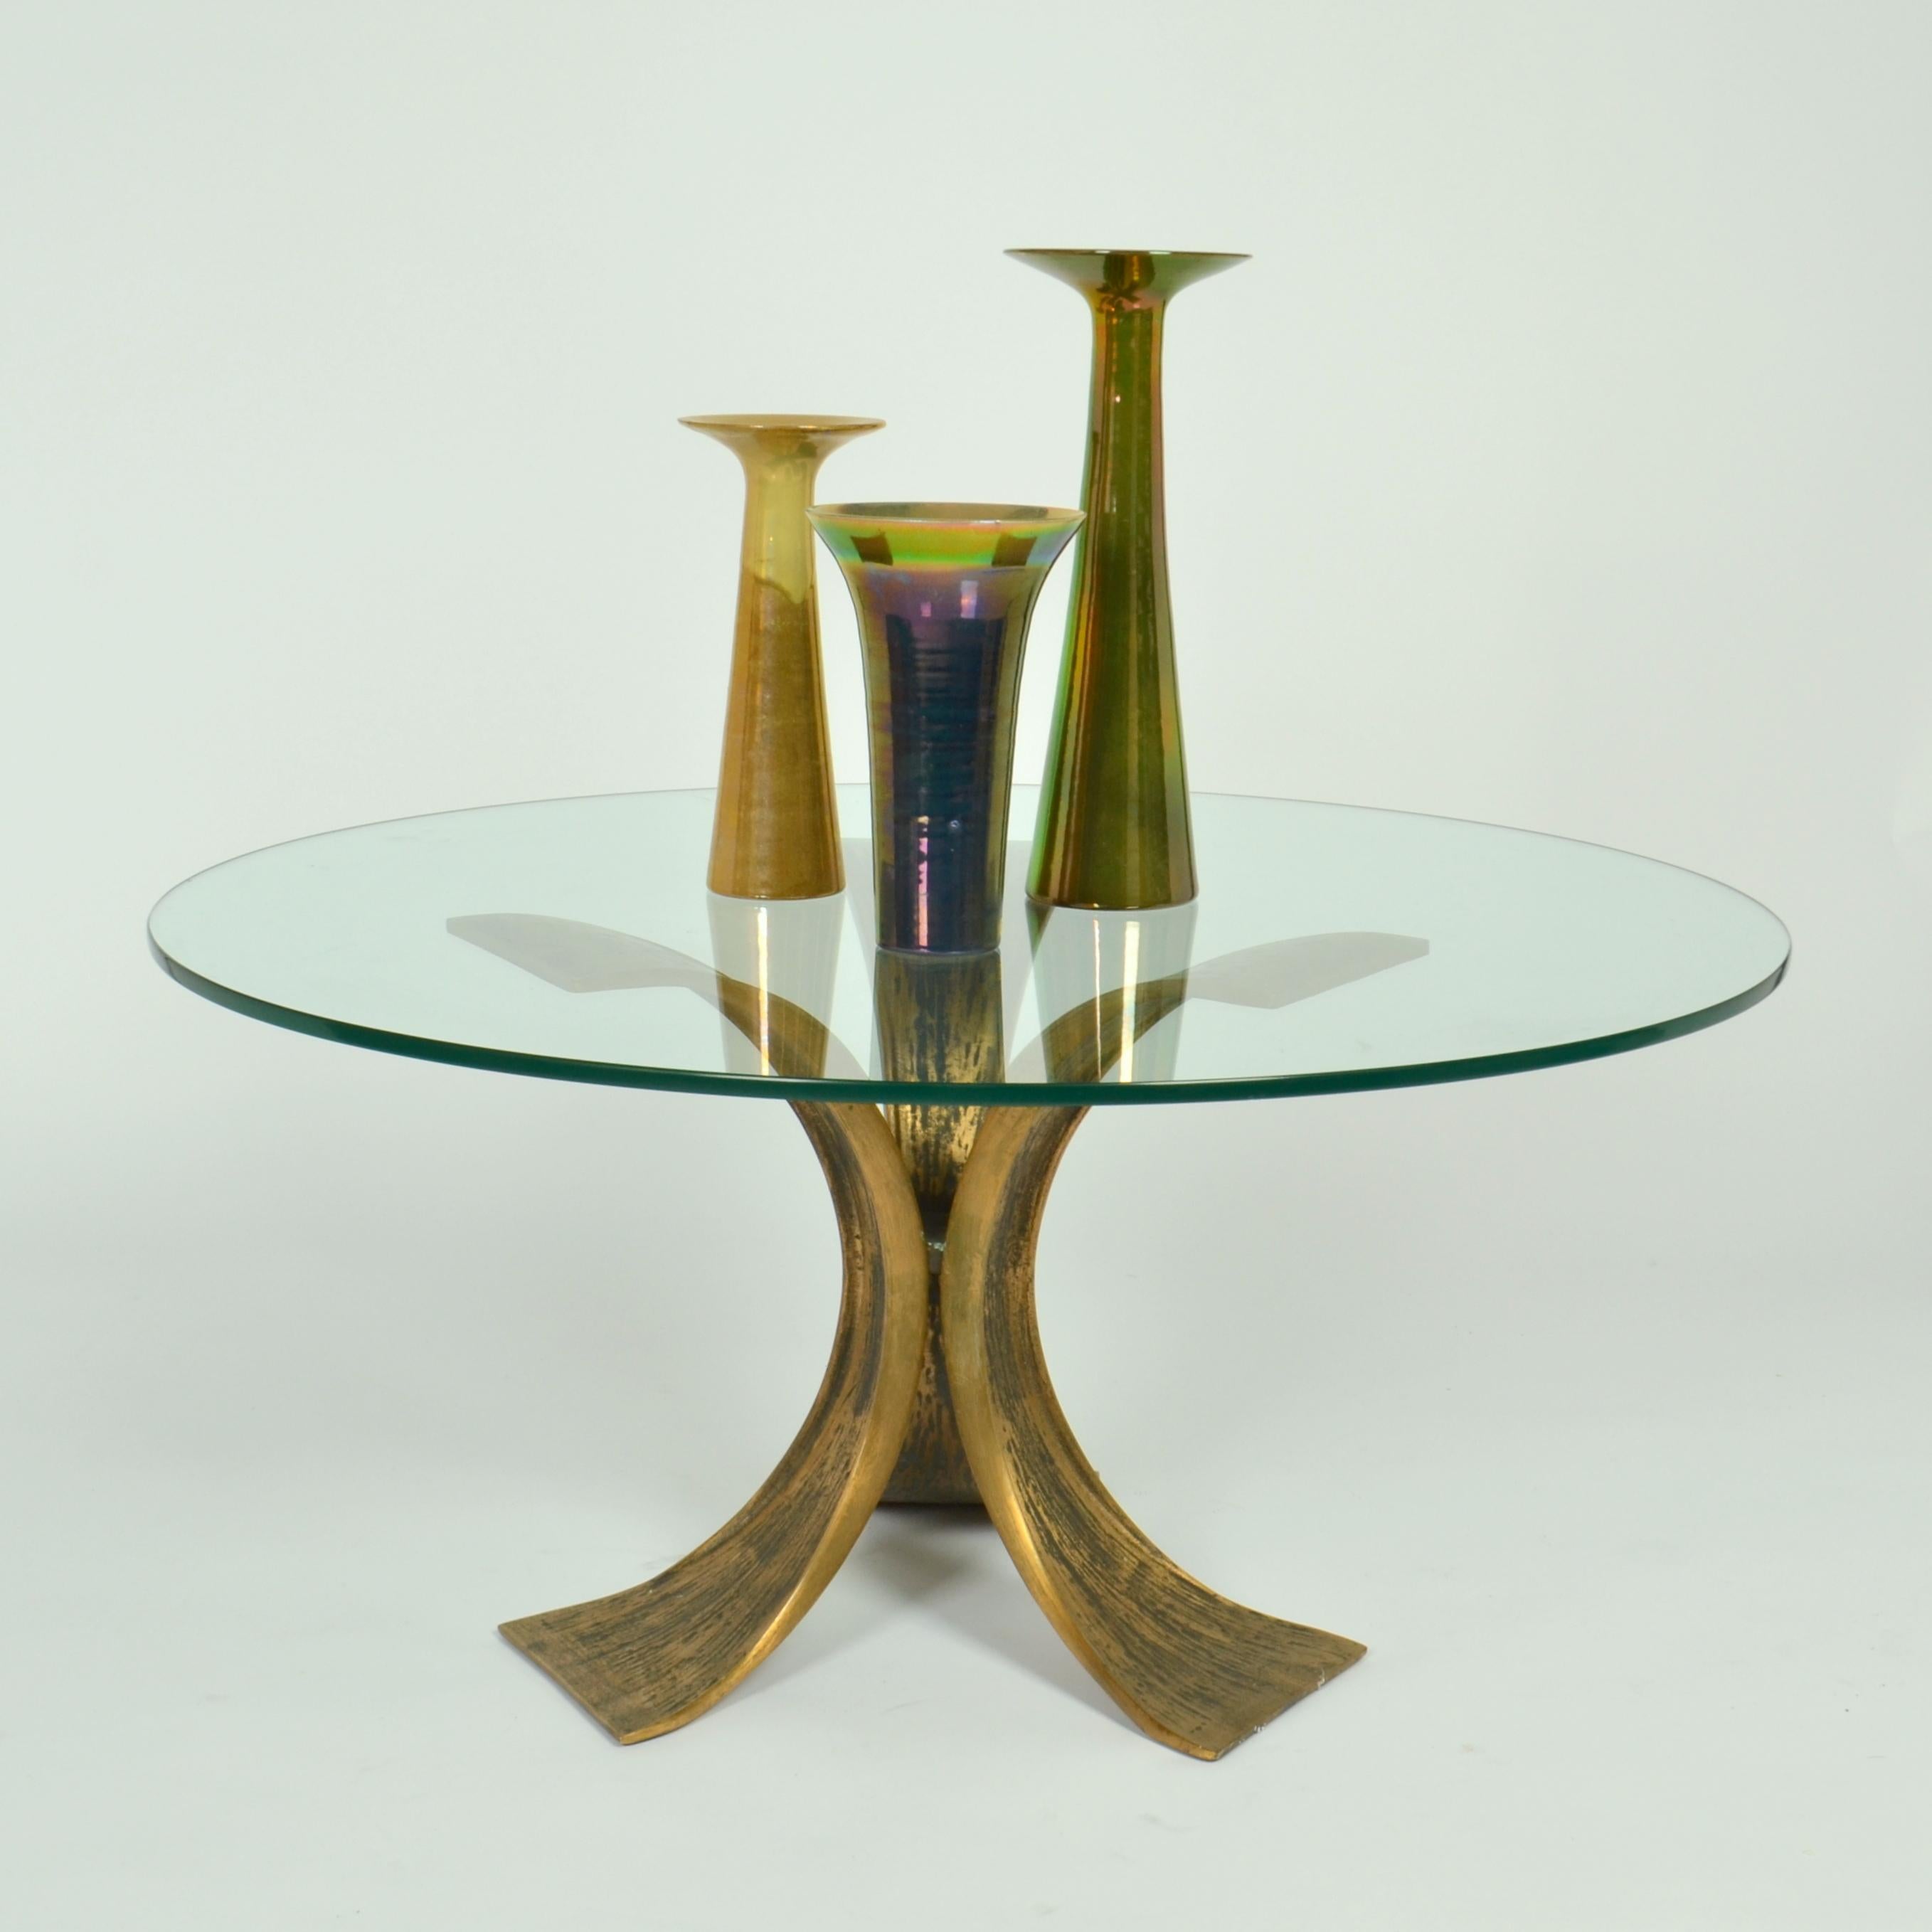 Brutalist Luciano Frigerio Sculptural Round Bronze and Glass Coffee Table Italy 1980's For Sale